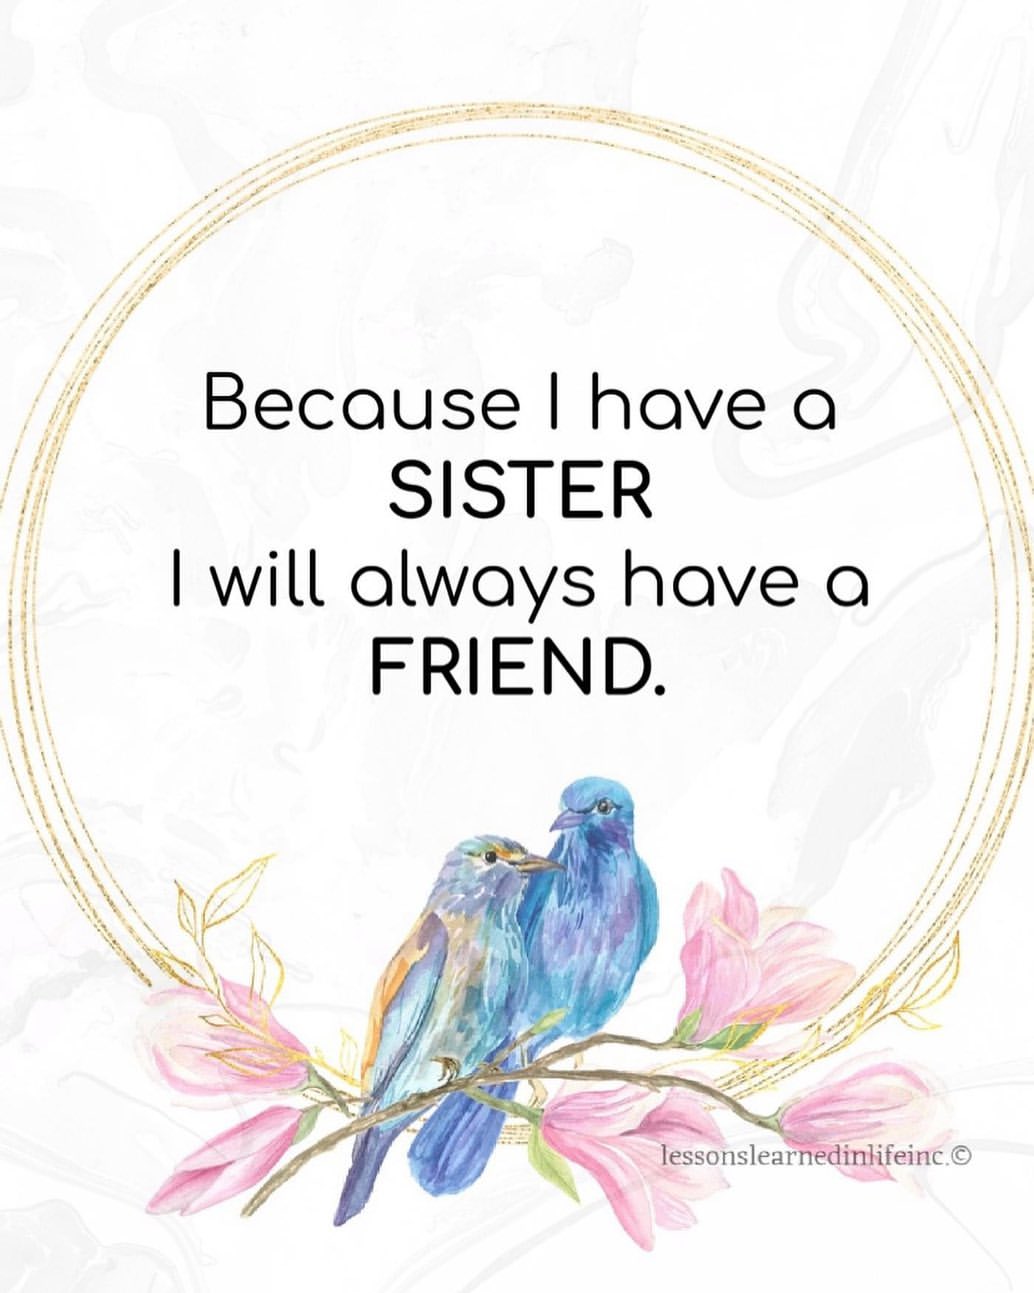 Because I have a sister I will always have a friend.